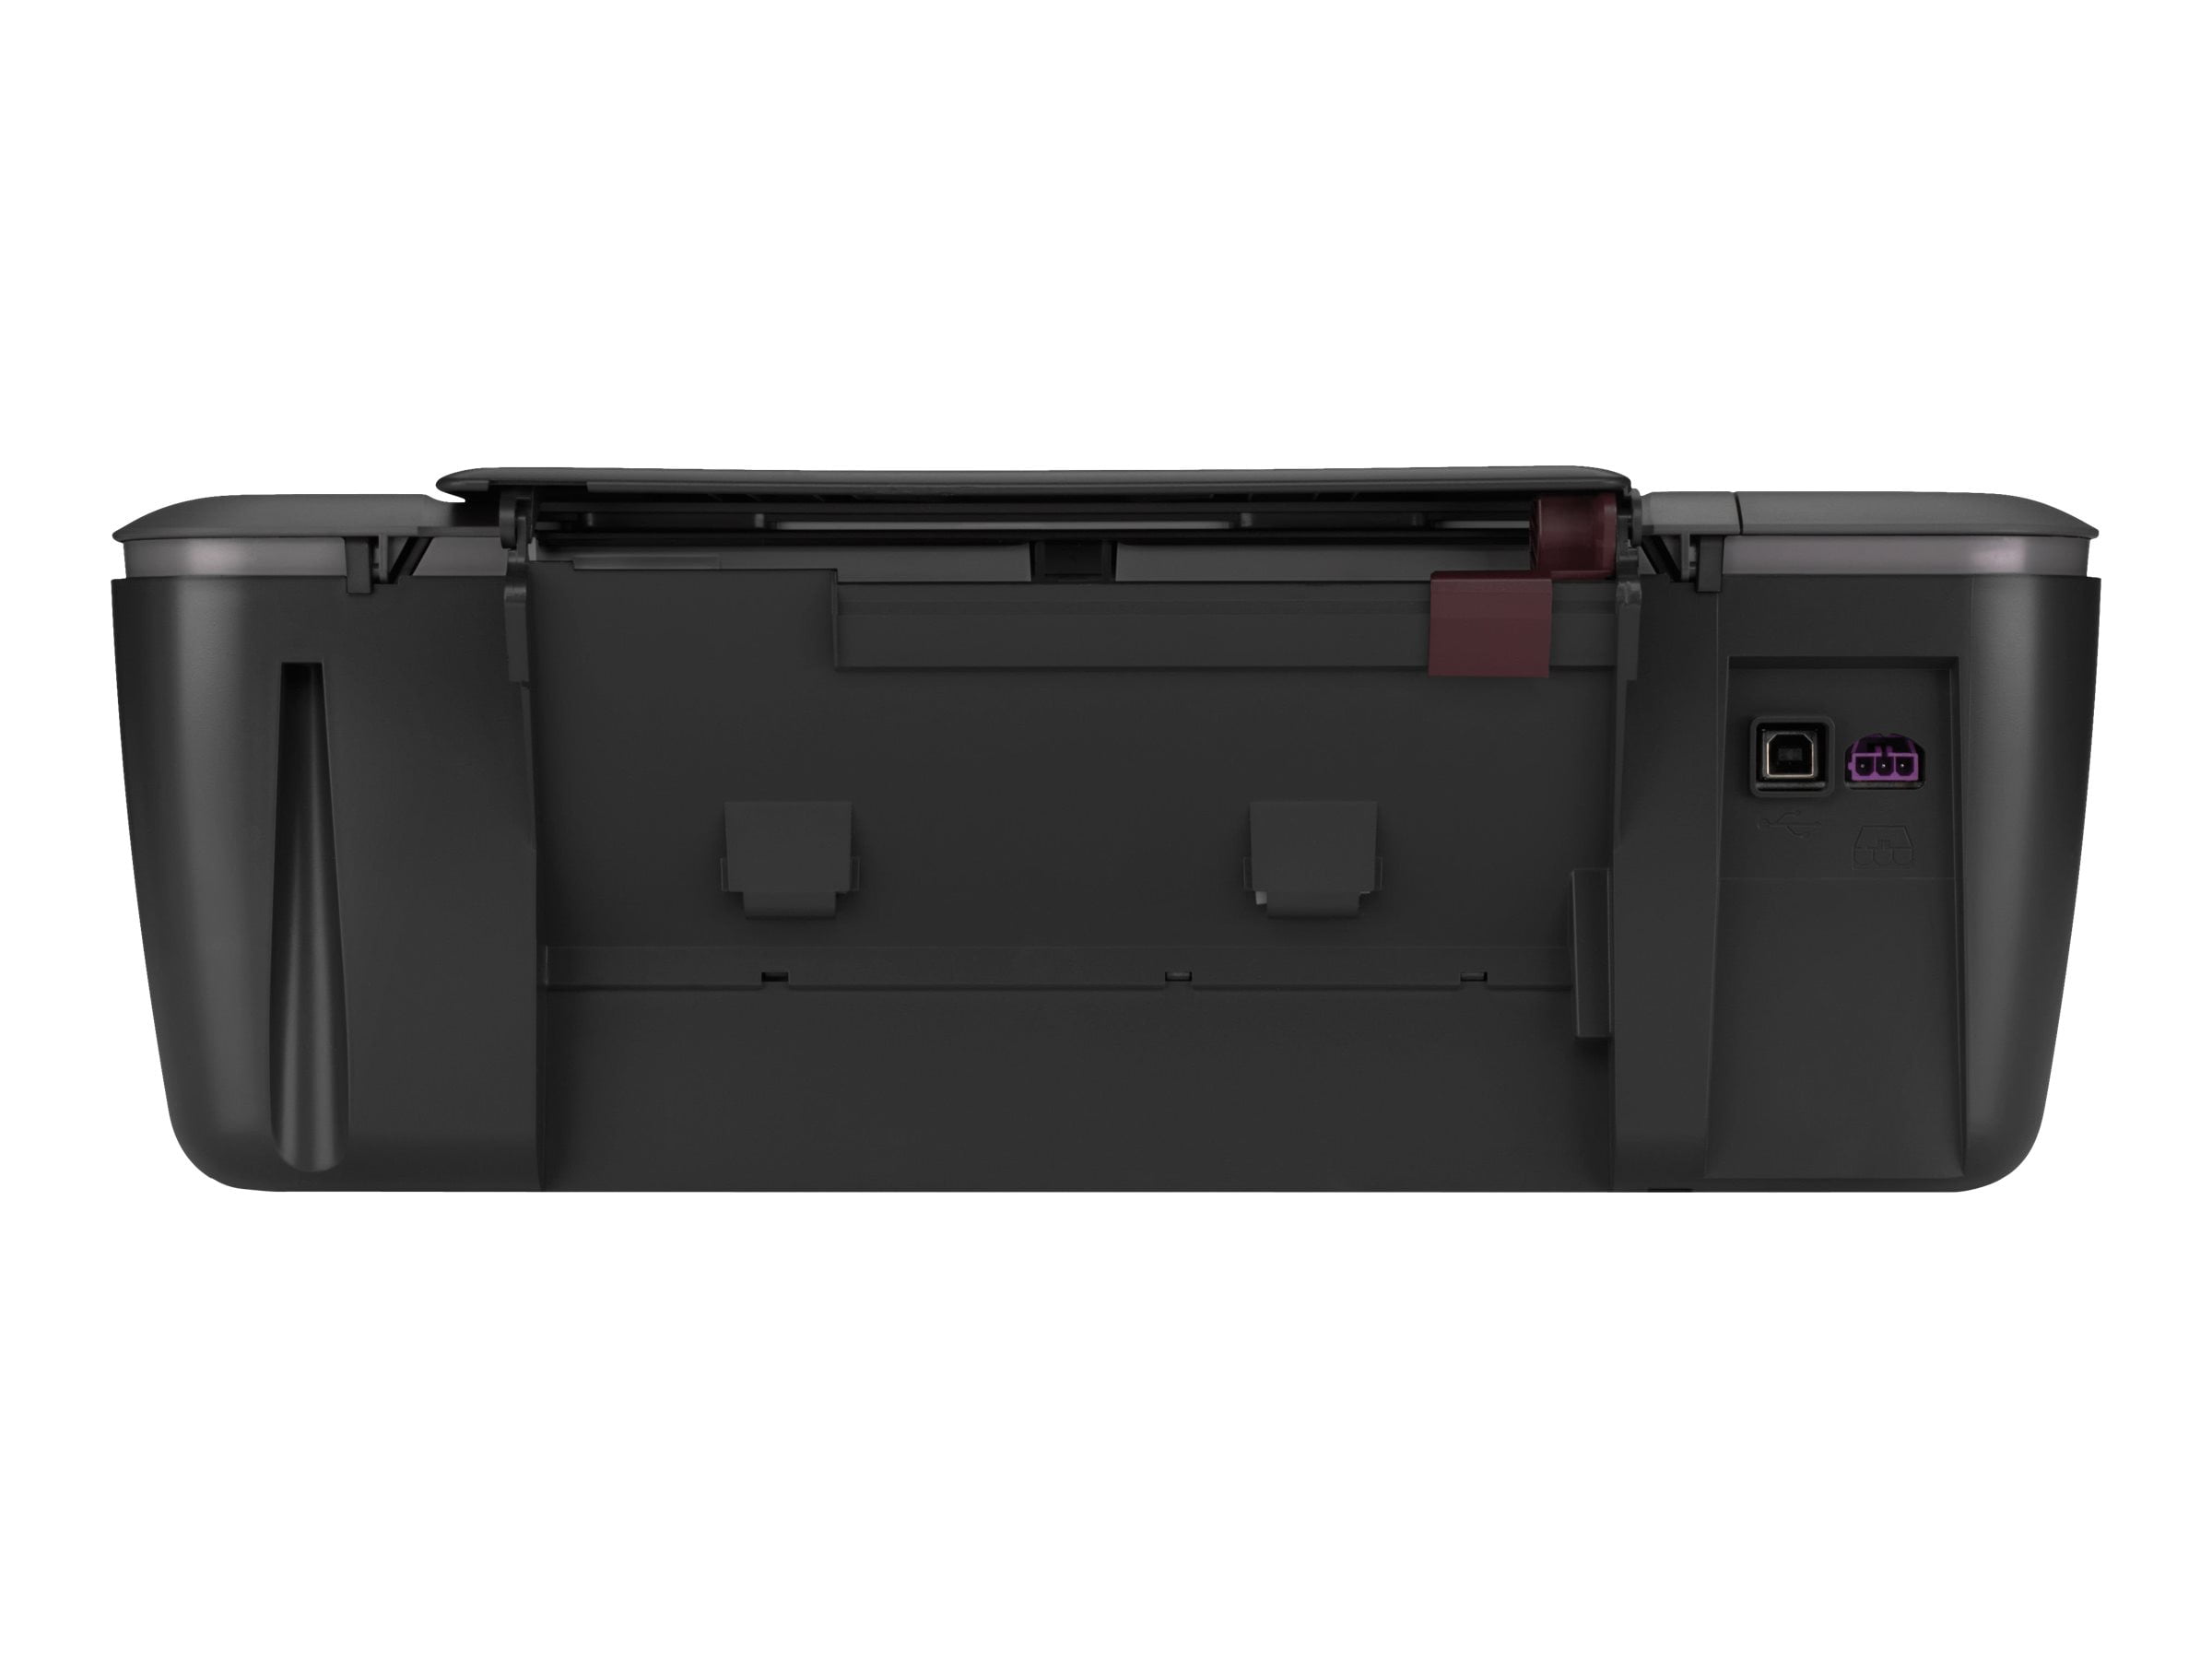 ale censur balance HP Deskjet 1050 All-in-One J410a - Multifunction printer - color - ink-jet  - A4 (media) - up to 16 ppm (copying) - up to 16 ppm (printing) - 60 sheets  - USB 2.0 - Walmart.com